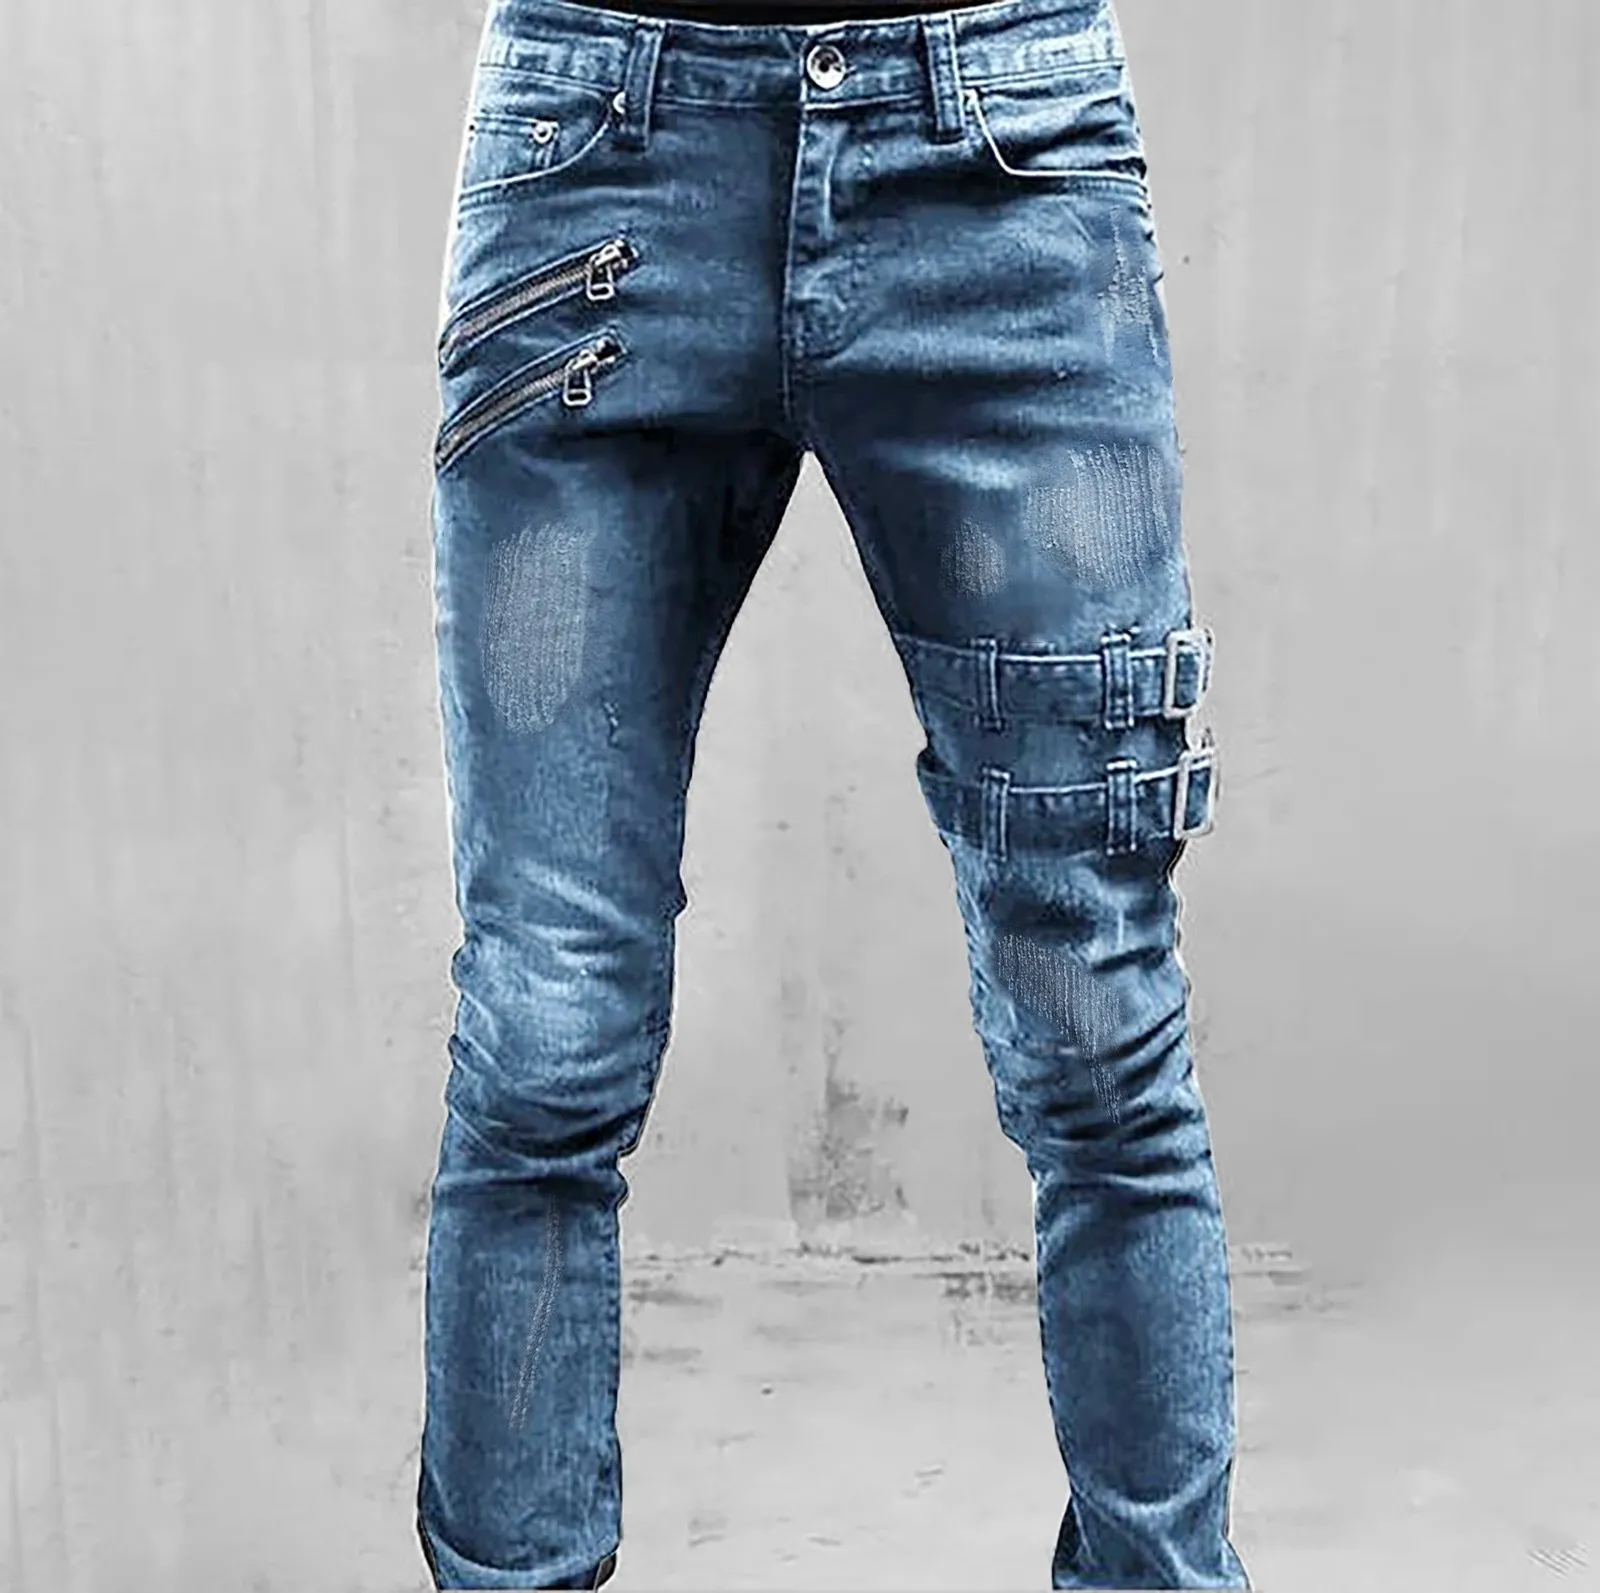 

Fit Ripped Casual Men's Mid-rise Slim Jeans Trousers Straight Men's pants Men Clothing Sport Jogger